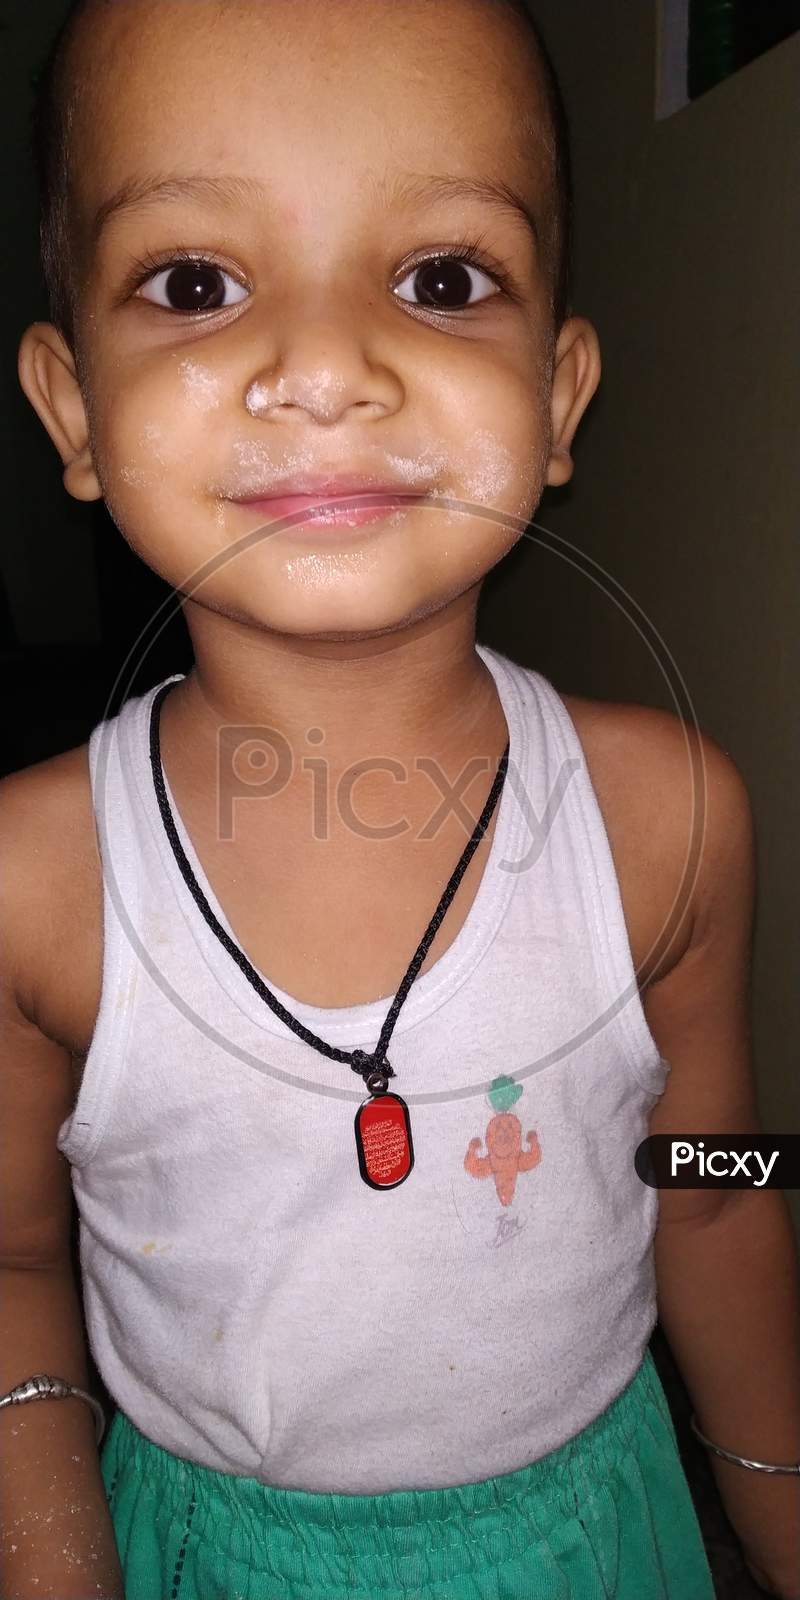 Image of a little  boy with some flour on face